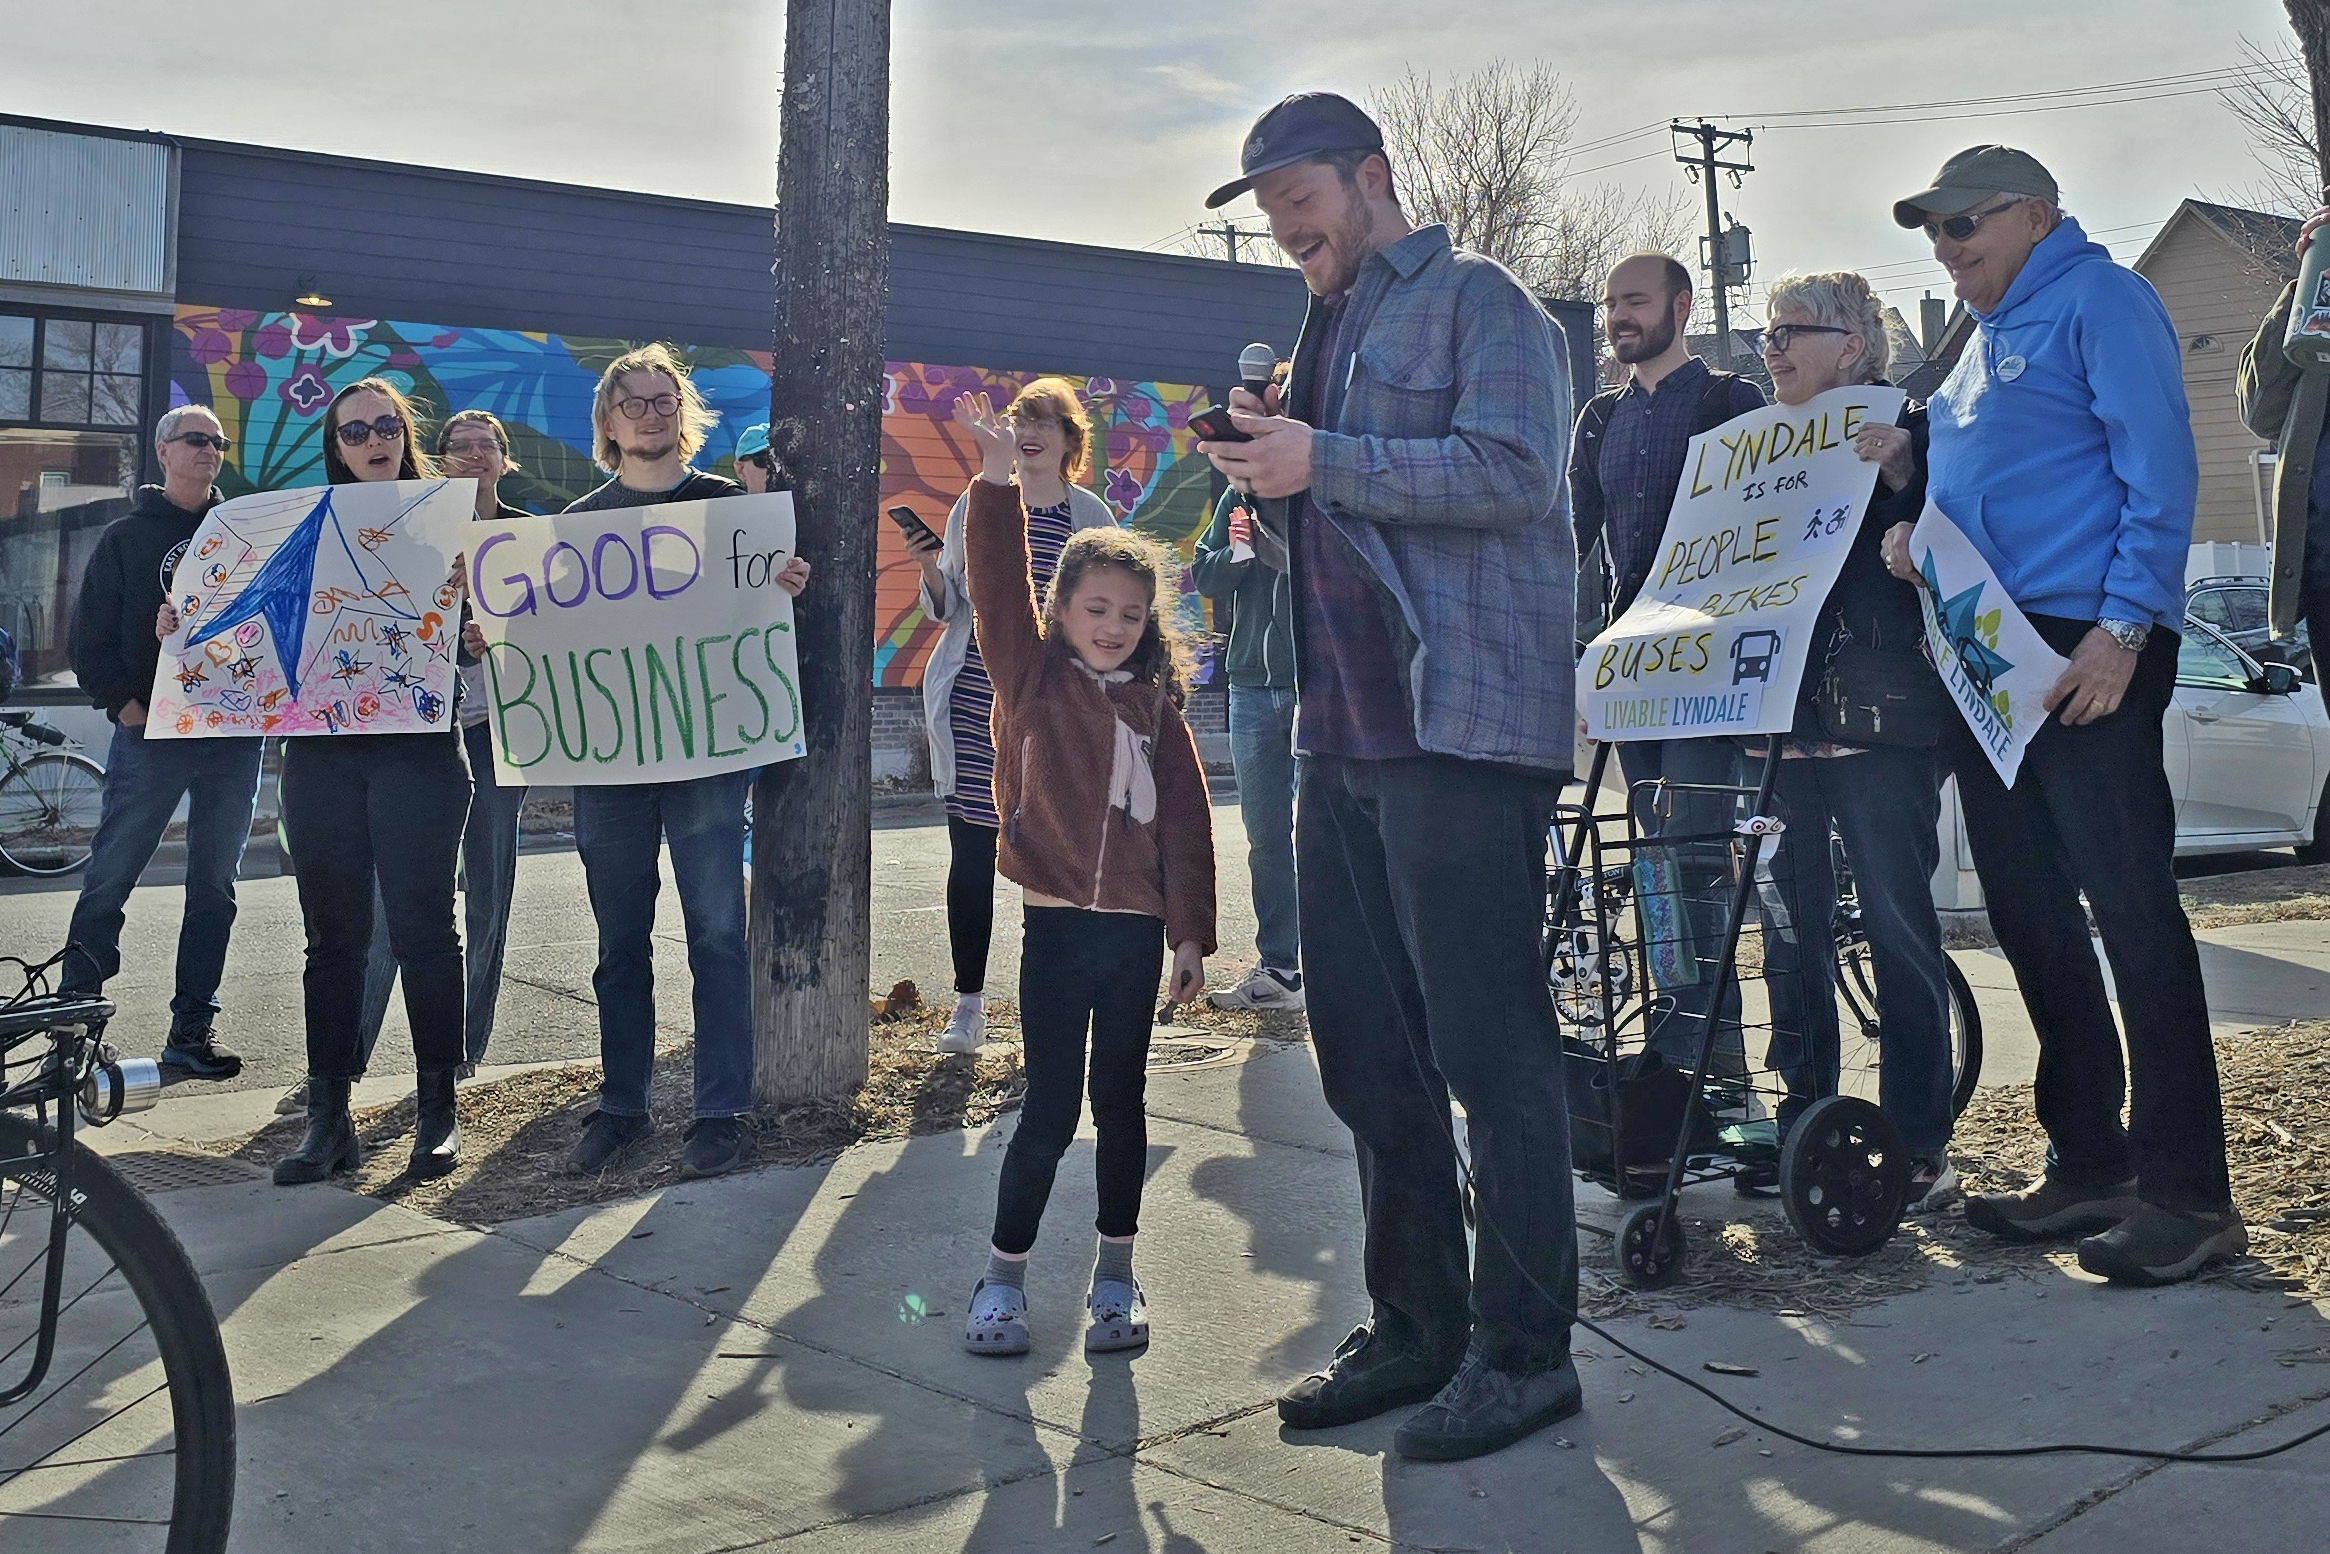 Addressing rally participants, Phil Schwartz, with his daughter Holly, shares how past improvements to Lyndale Avenue made it more pleasant for his family to visit and travel along Lyndale Avenue 